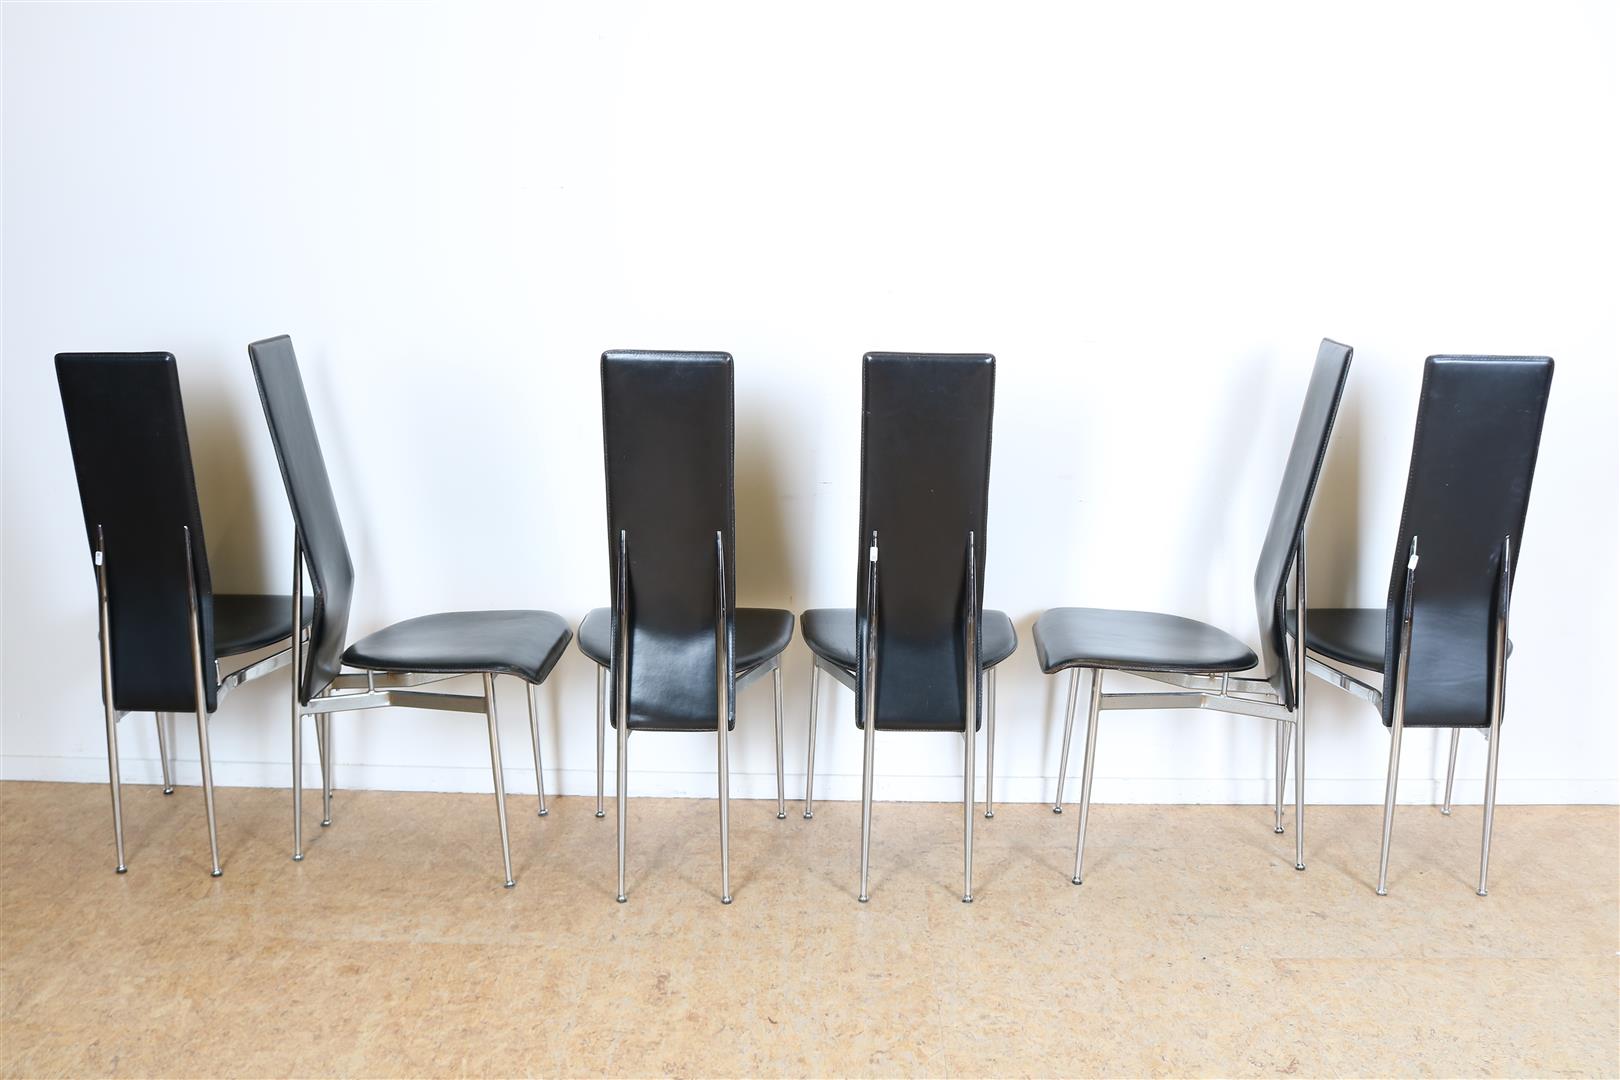 Series of 11bauhaus style dining room chairs, including 1 armchair with black saddle leather seat on - Image 2 of 7